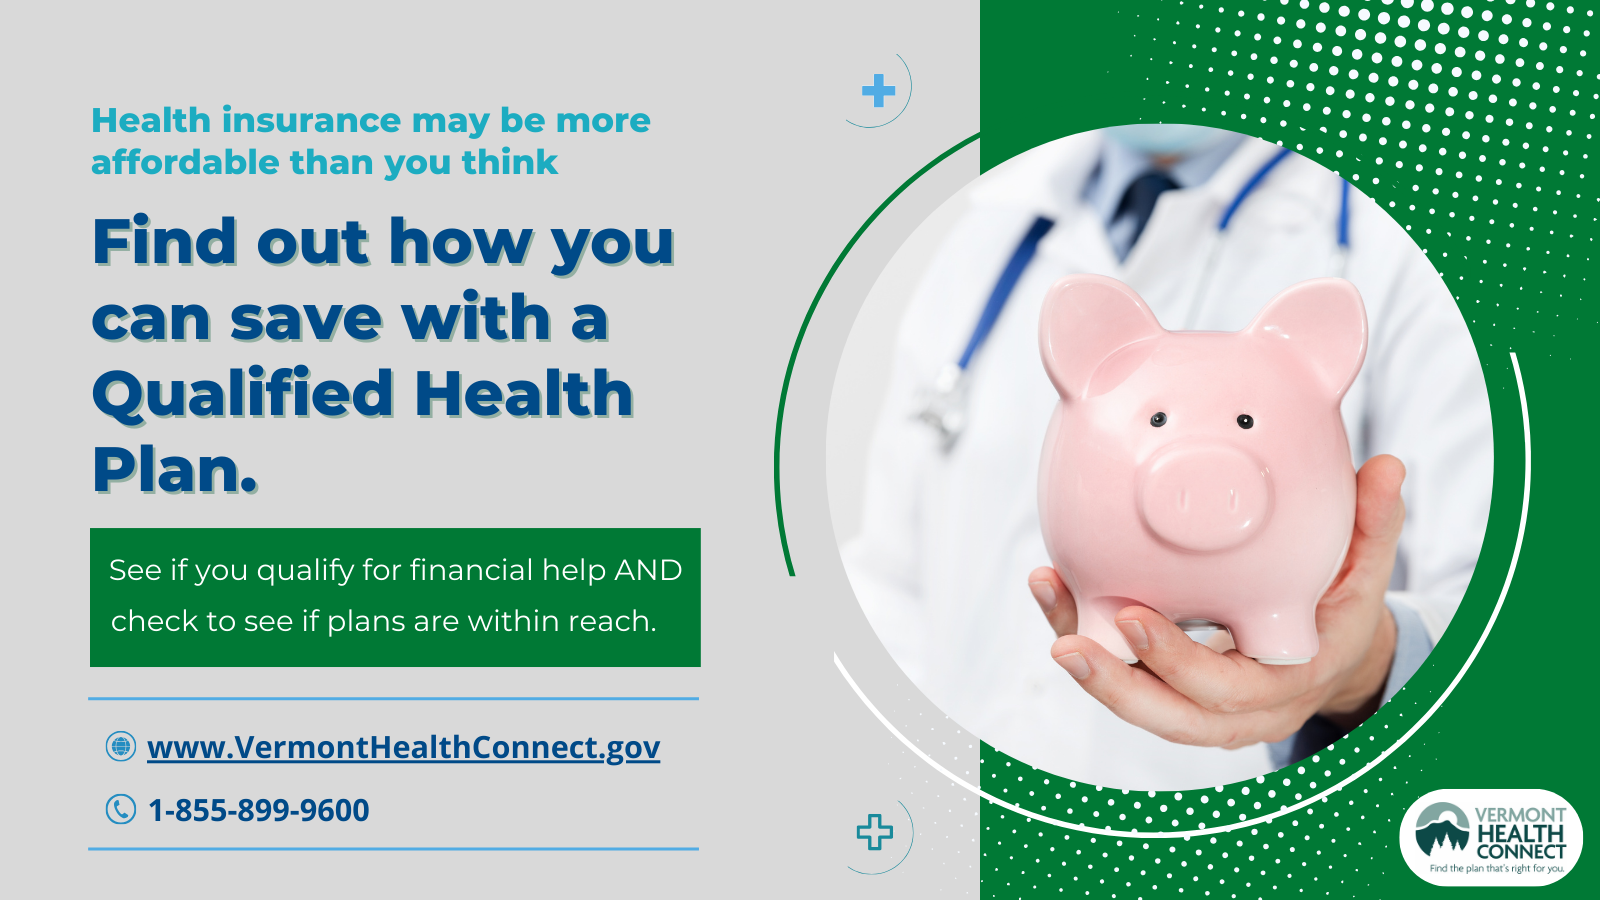 Medical professional holding a piggy bank and saying that health insurance can be affordable and they should see if they qualify for financial assistance when enrolling in a Qualified Health Plan with Vermont Health Connect.